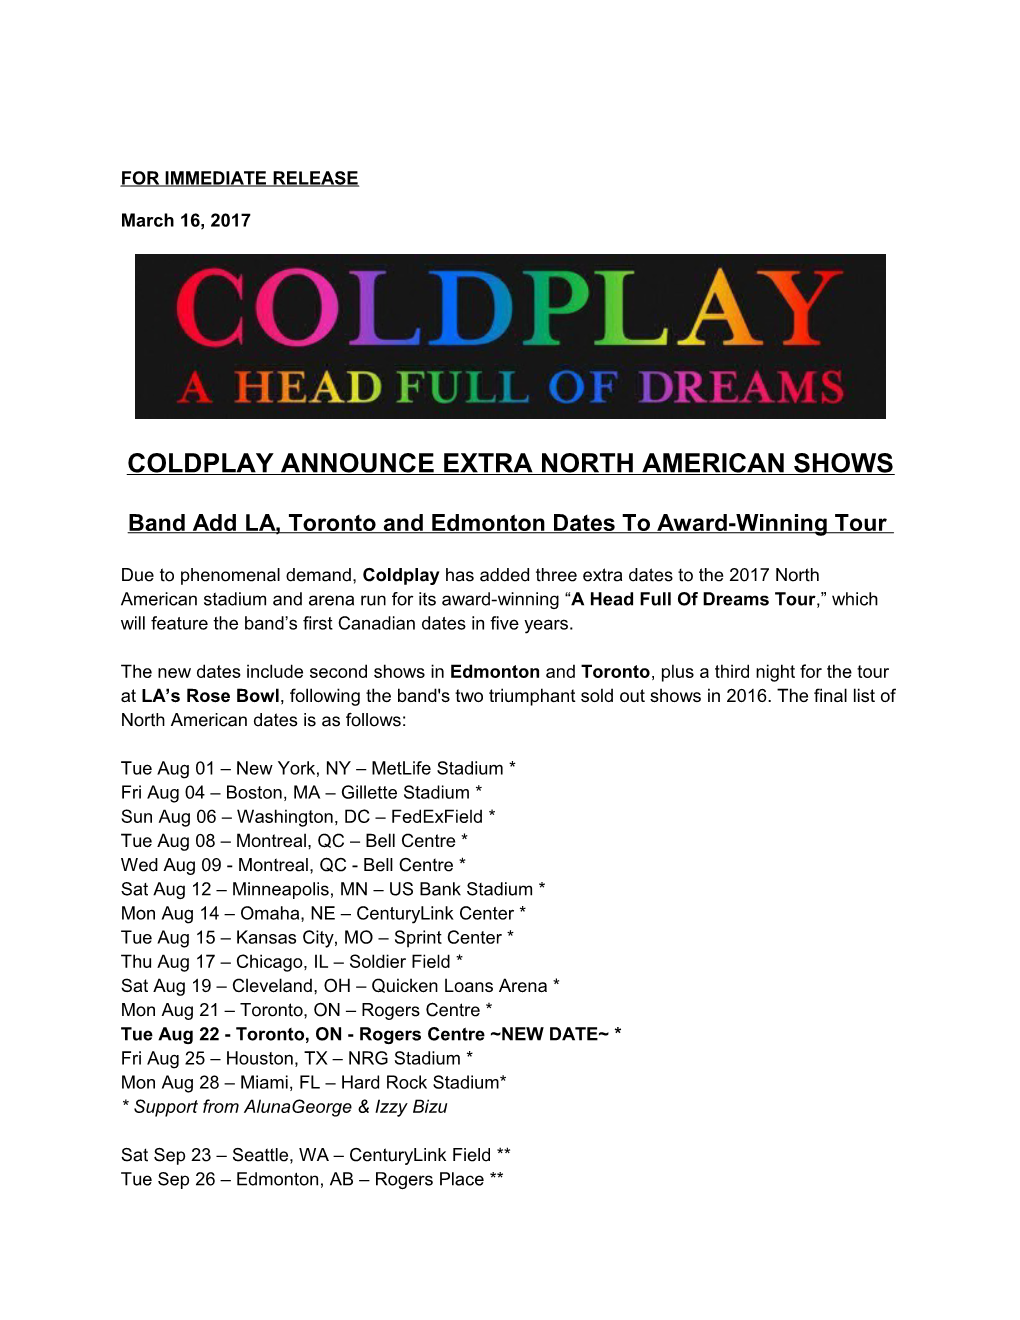 Coldplay Announce Extra North American Shows